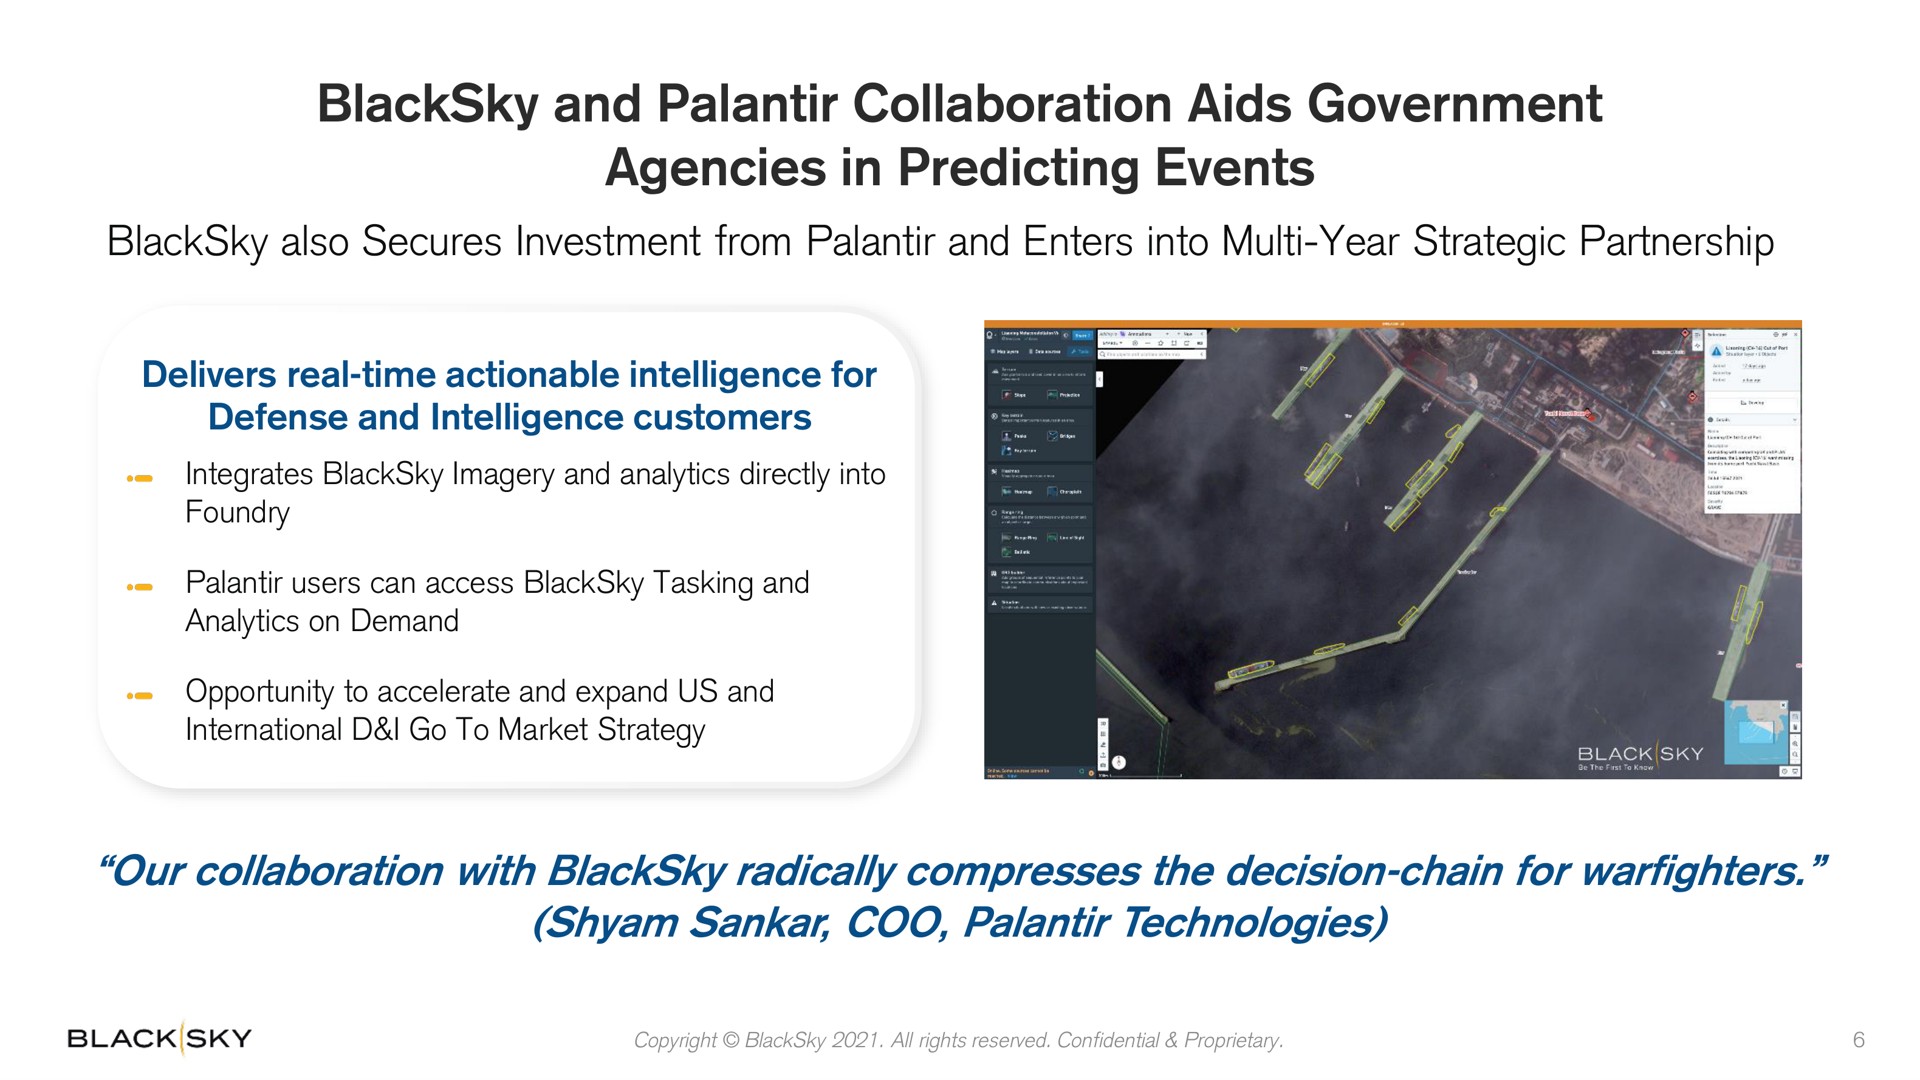 and collaboration aids government agencies in predicting events | BlackSky